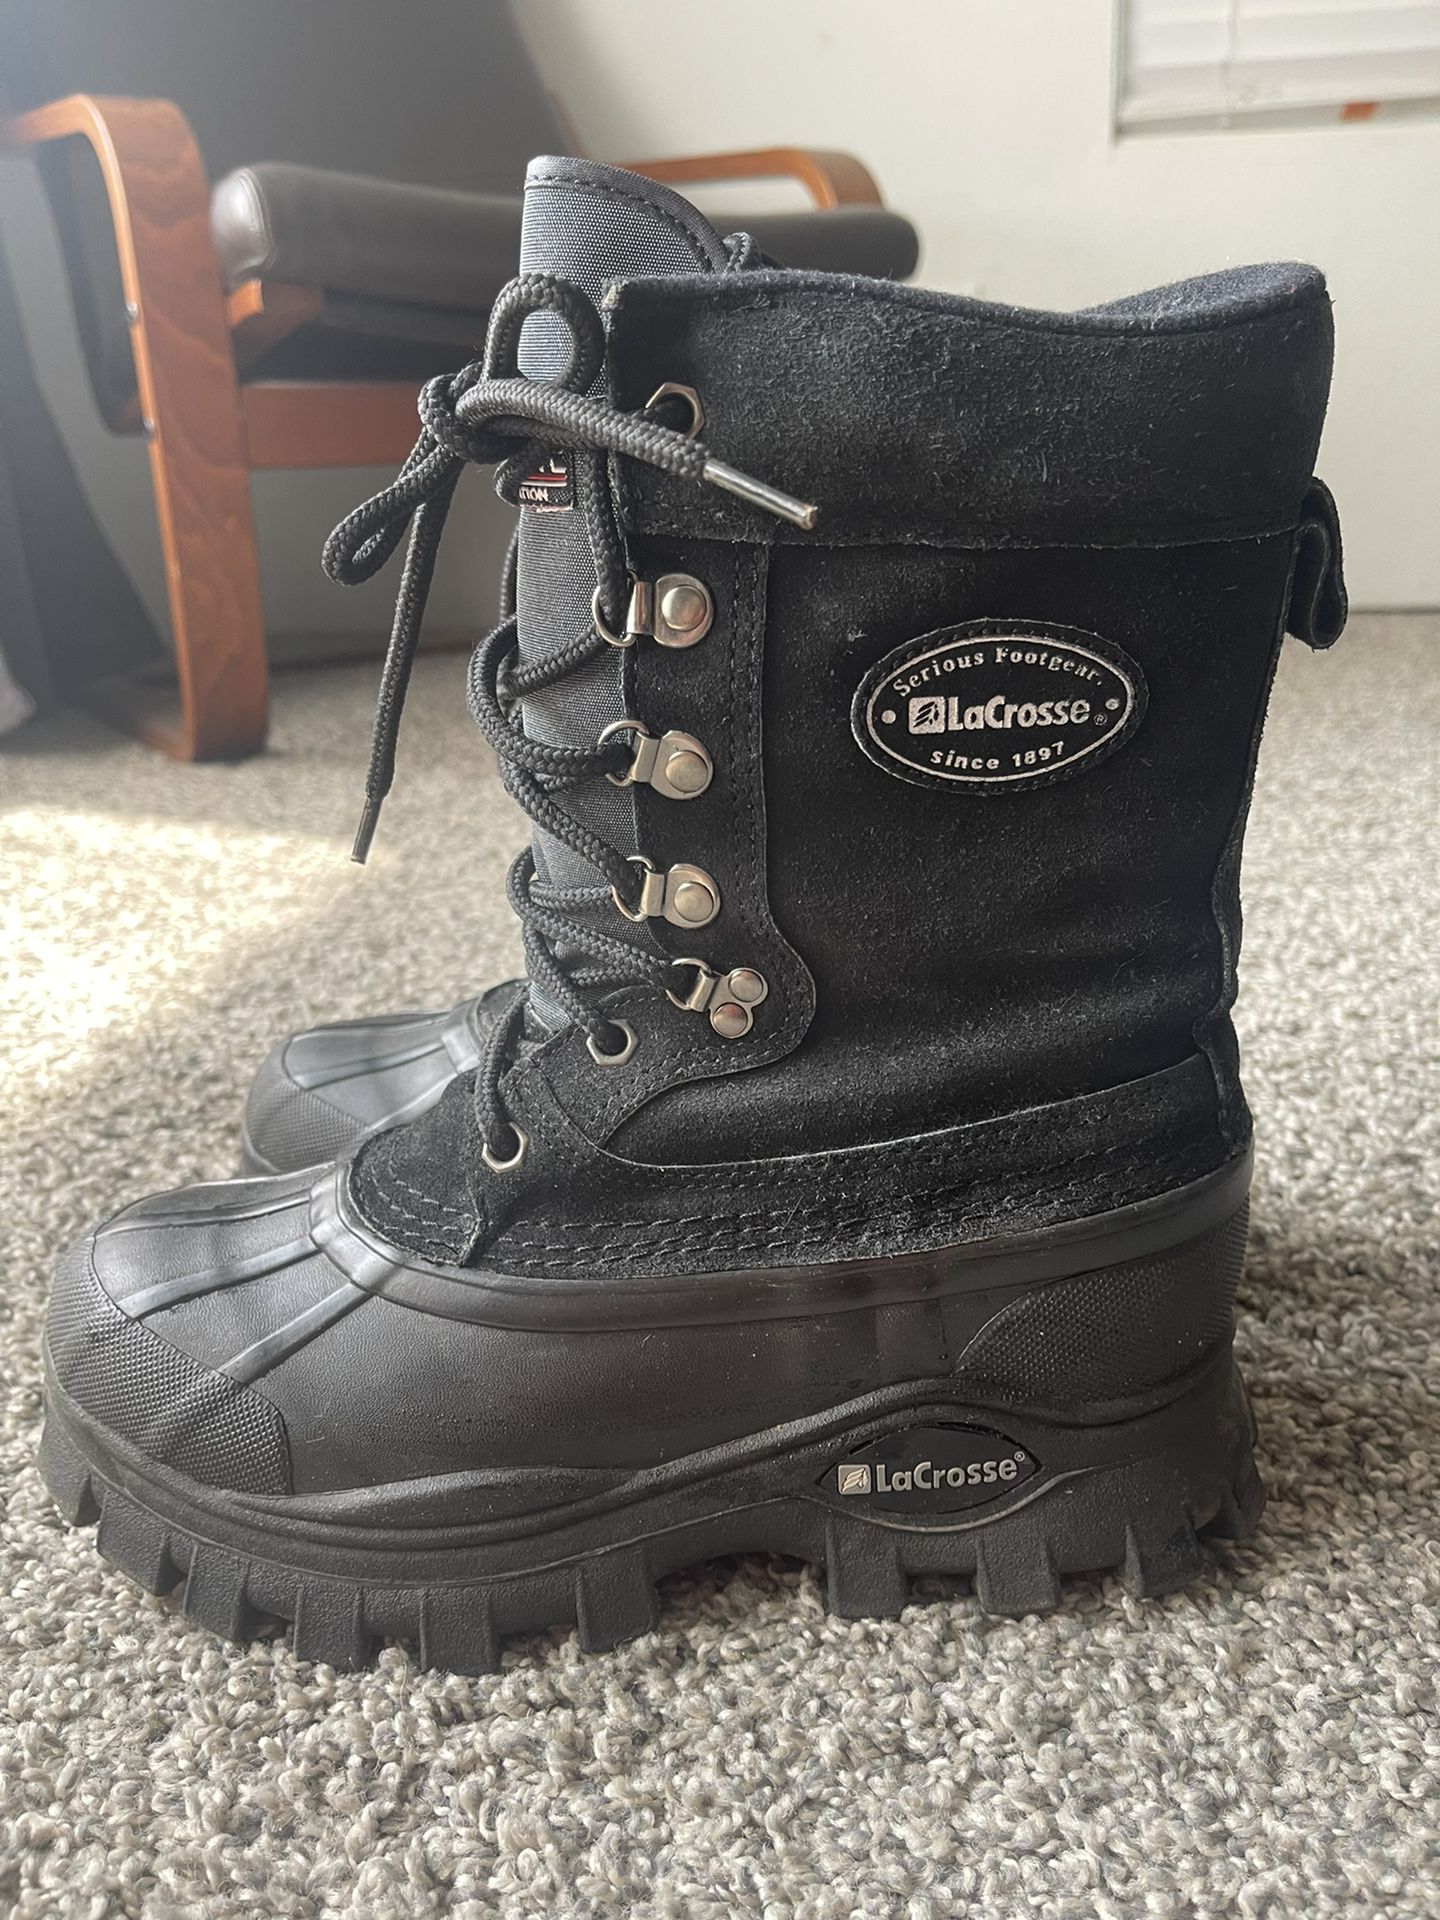 Snow Boots For Women Size 8